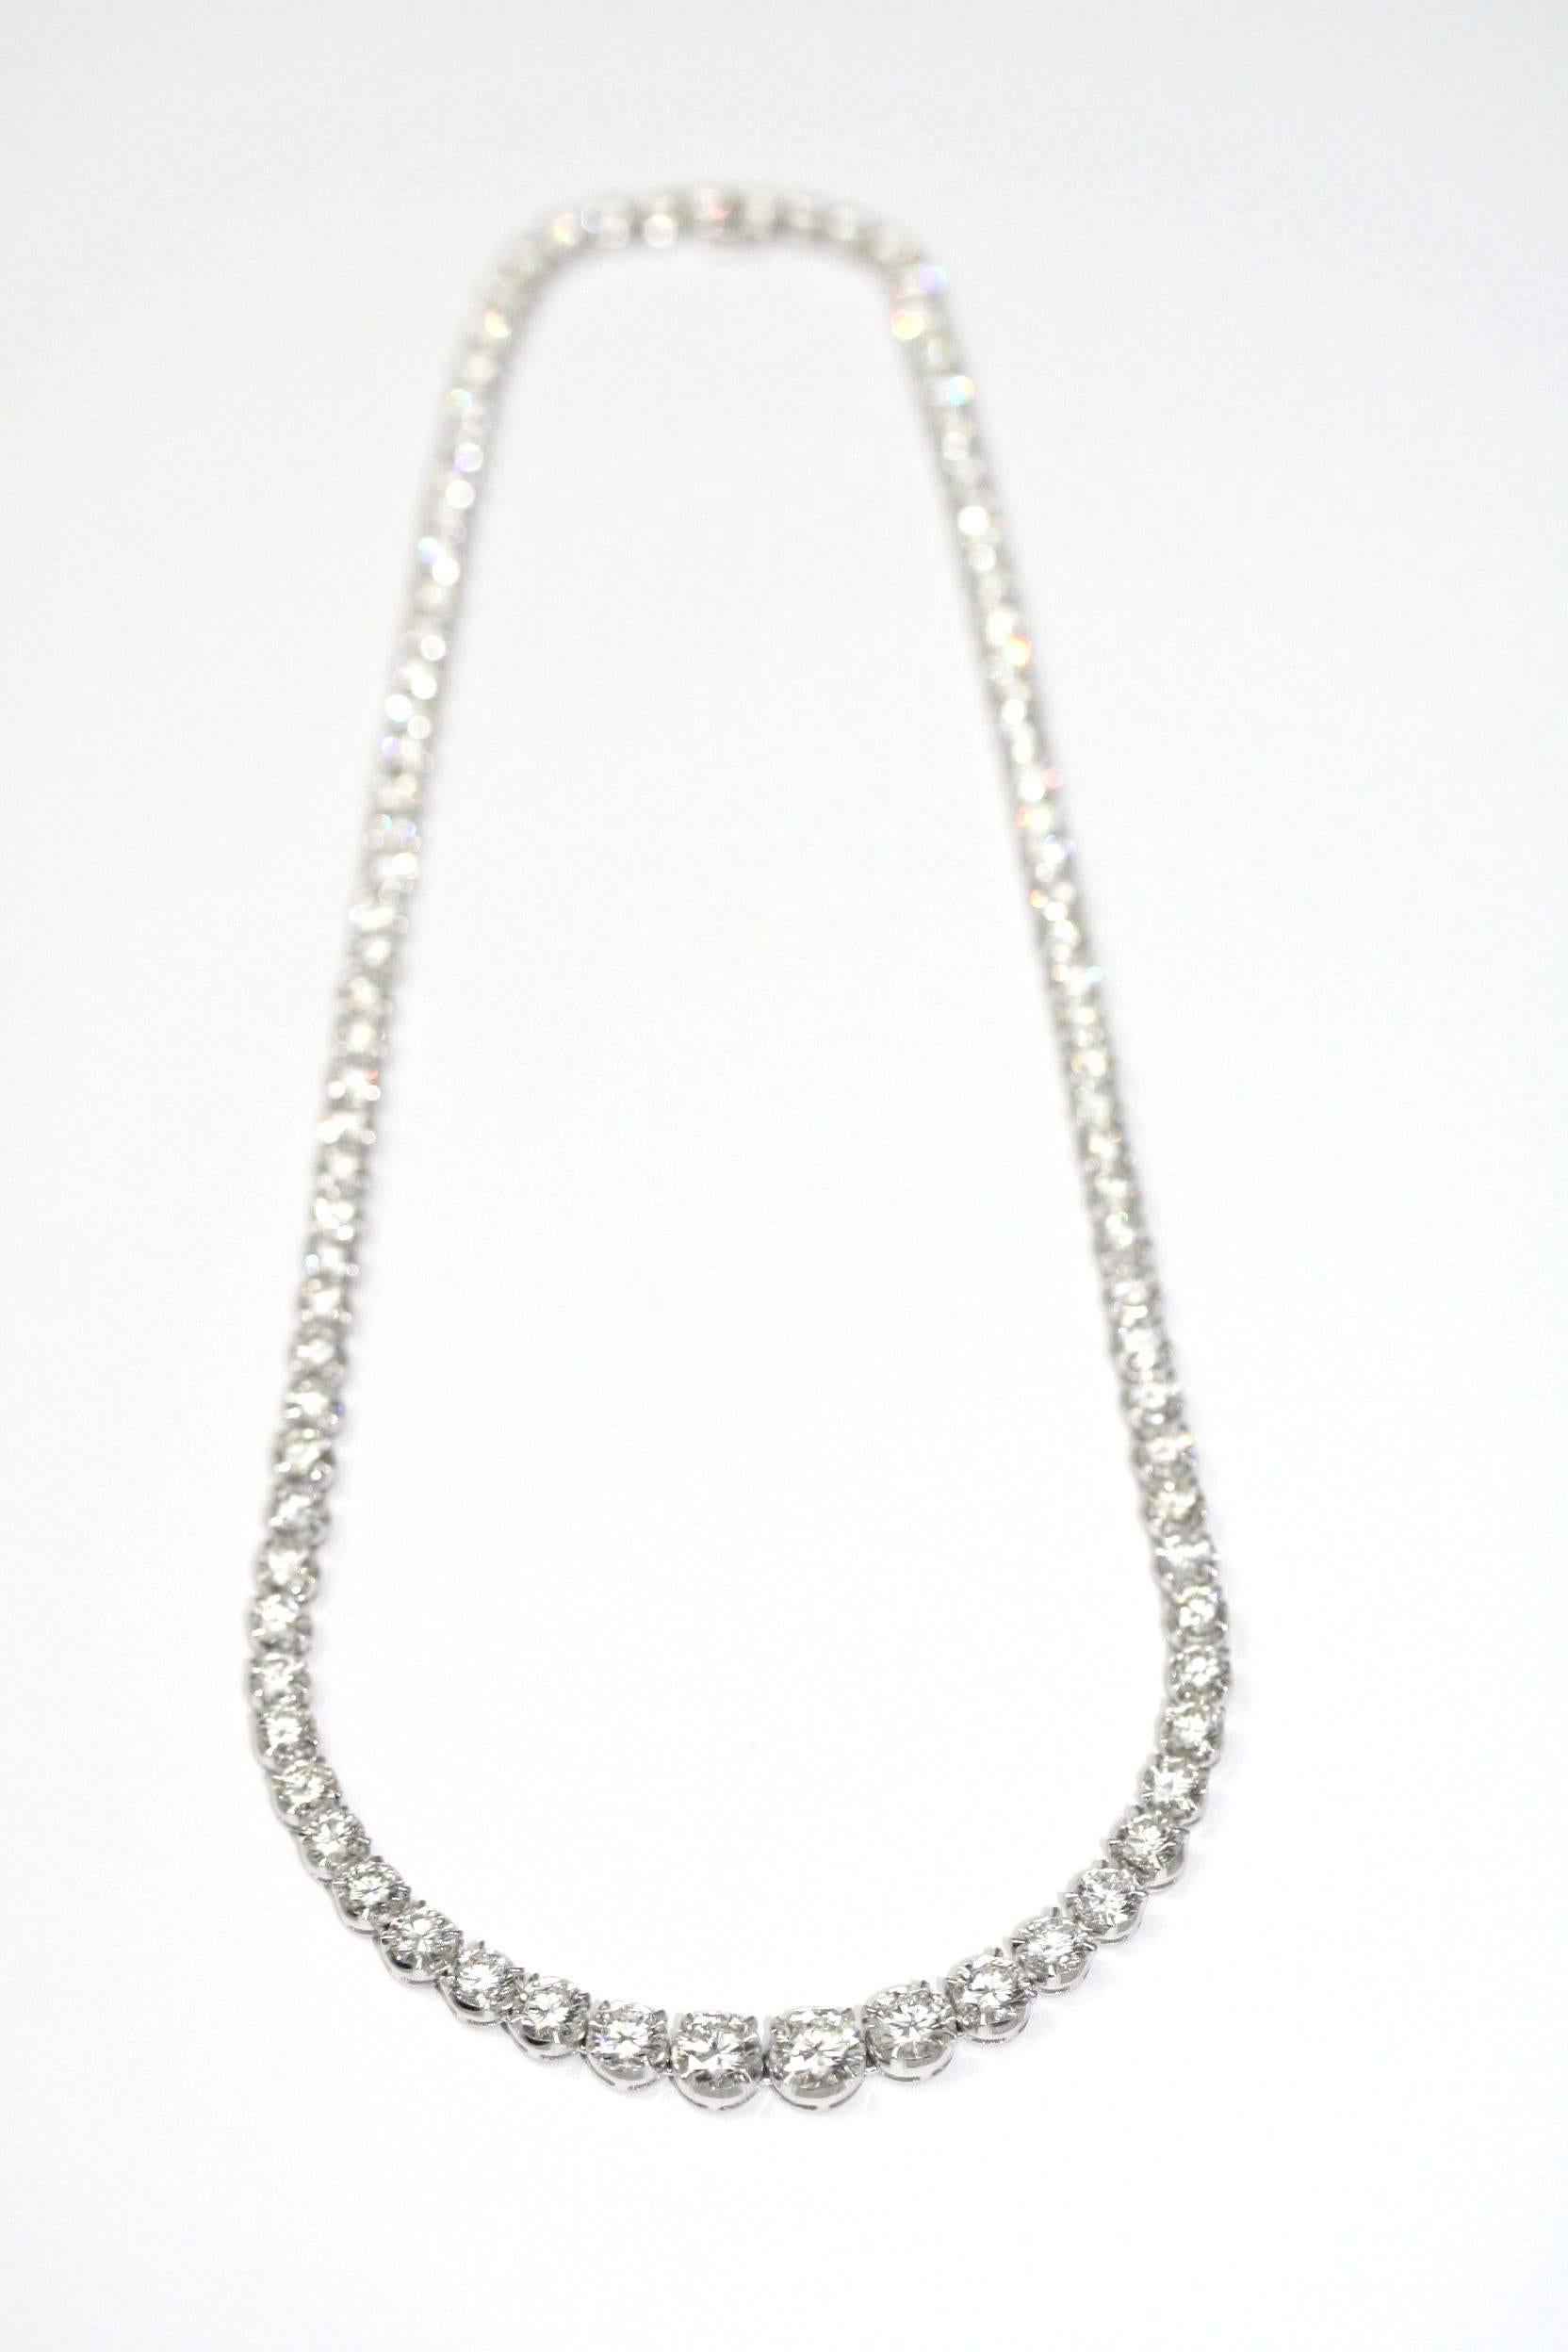 CARTIER River necklace in white gold set with approx. 30 carats of diamonds, signed and numbered 866922, length 42cm (34.6 grams)